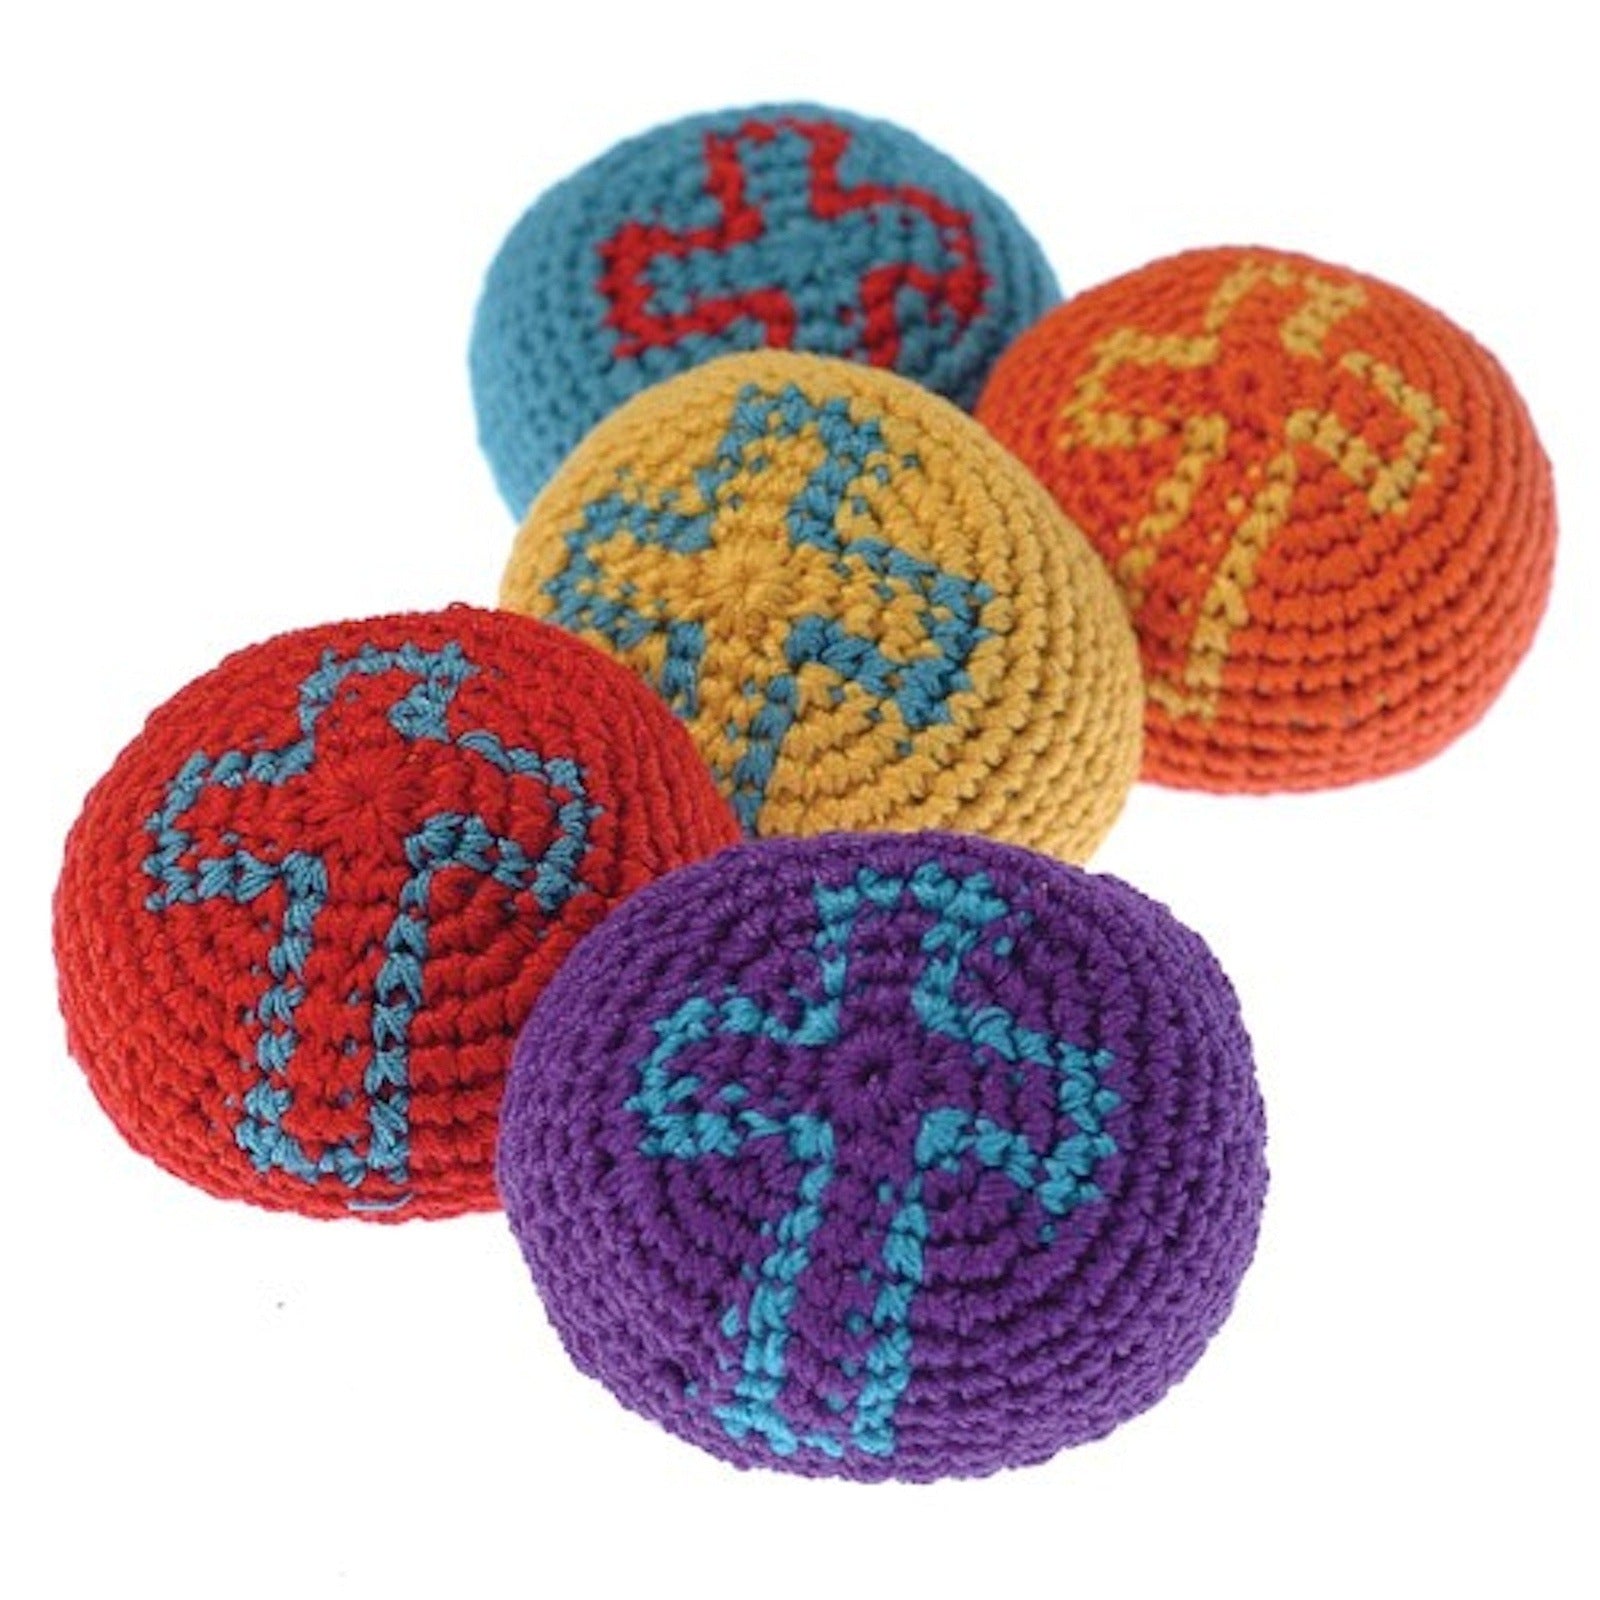 Lot of 12 Assorted Color Religious Christian Theme Cross Knitted Hackie Sacks - Opticdeals